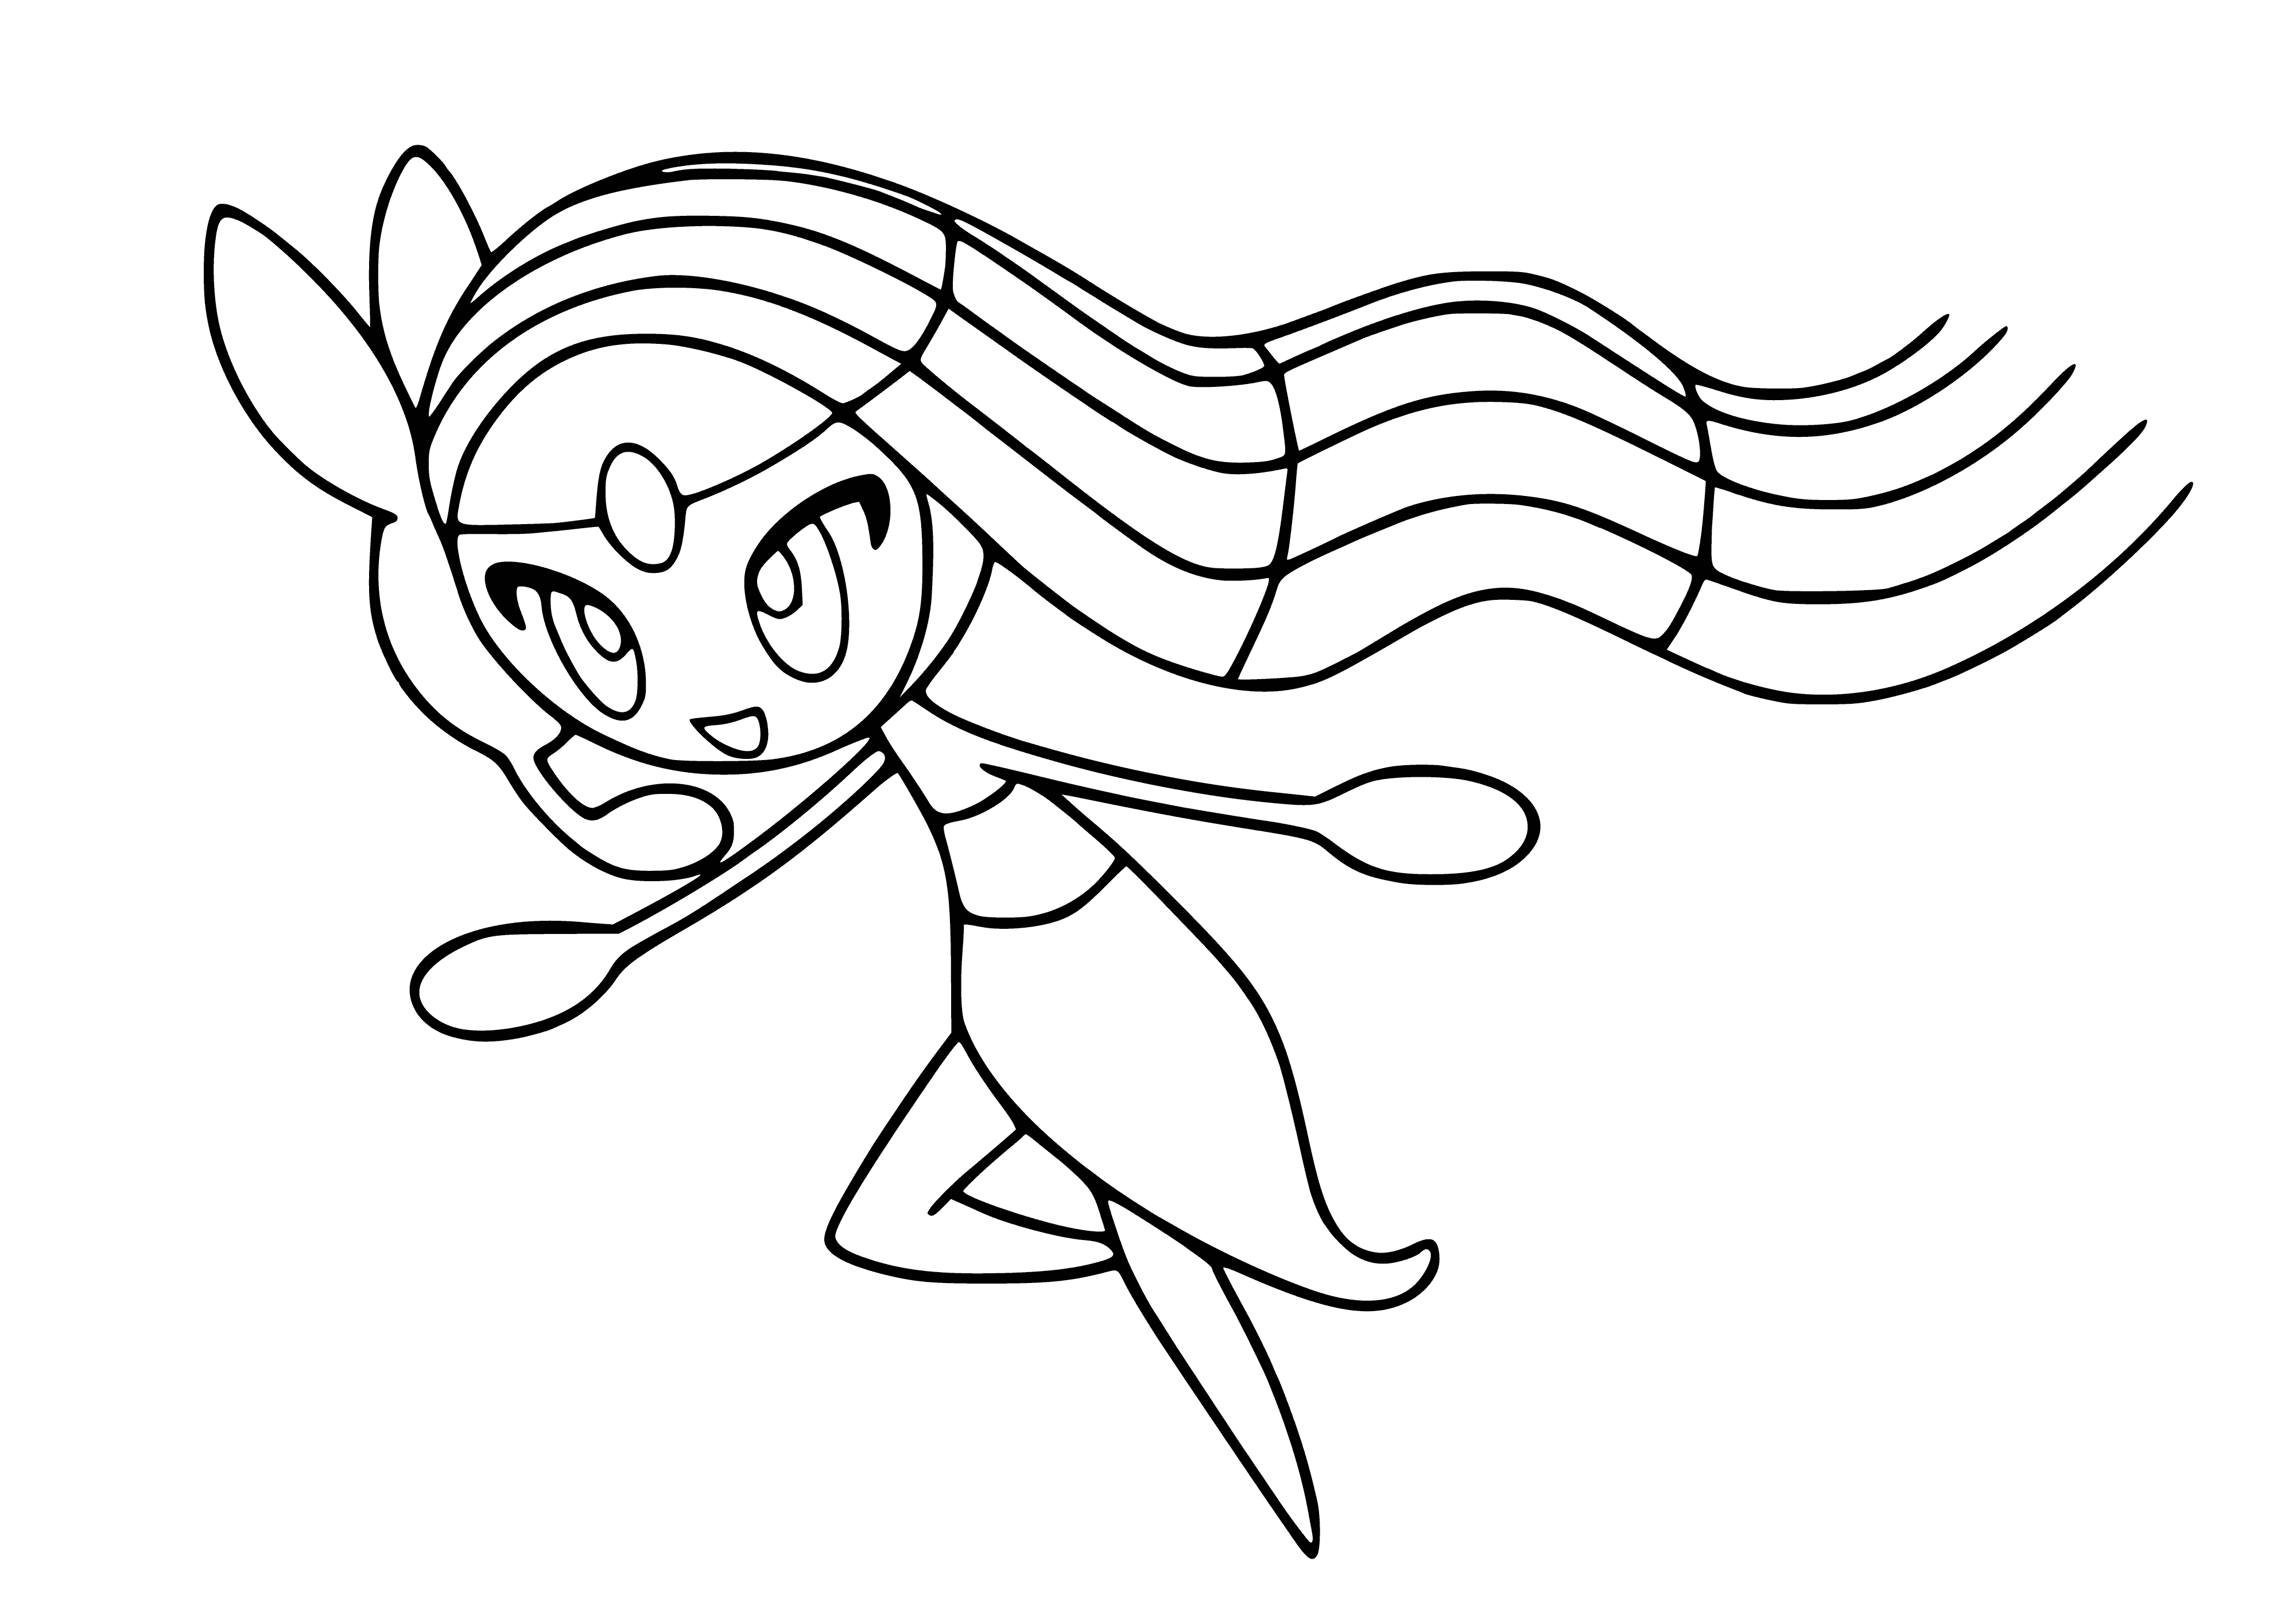 coloring page: Meloetta is a rare, mysterious Pokemon with delicate features, thin arms/legs, two wings and a long, curled tail.